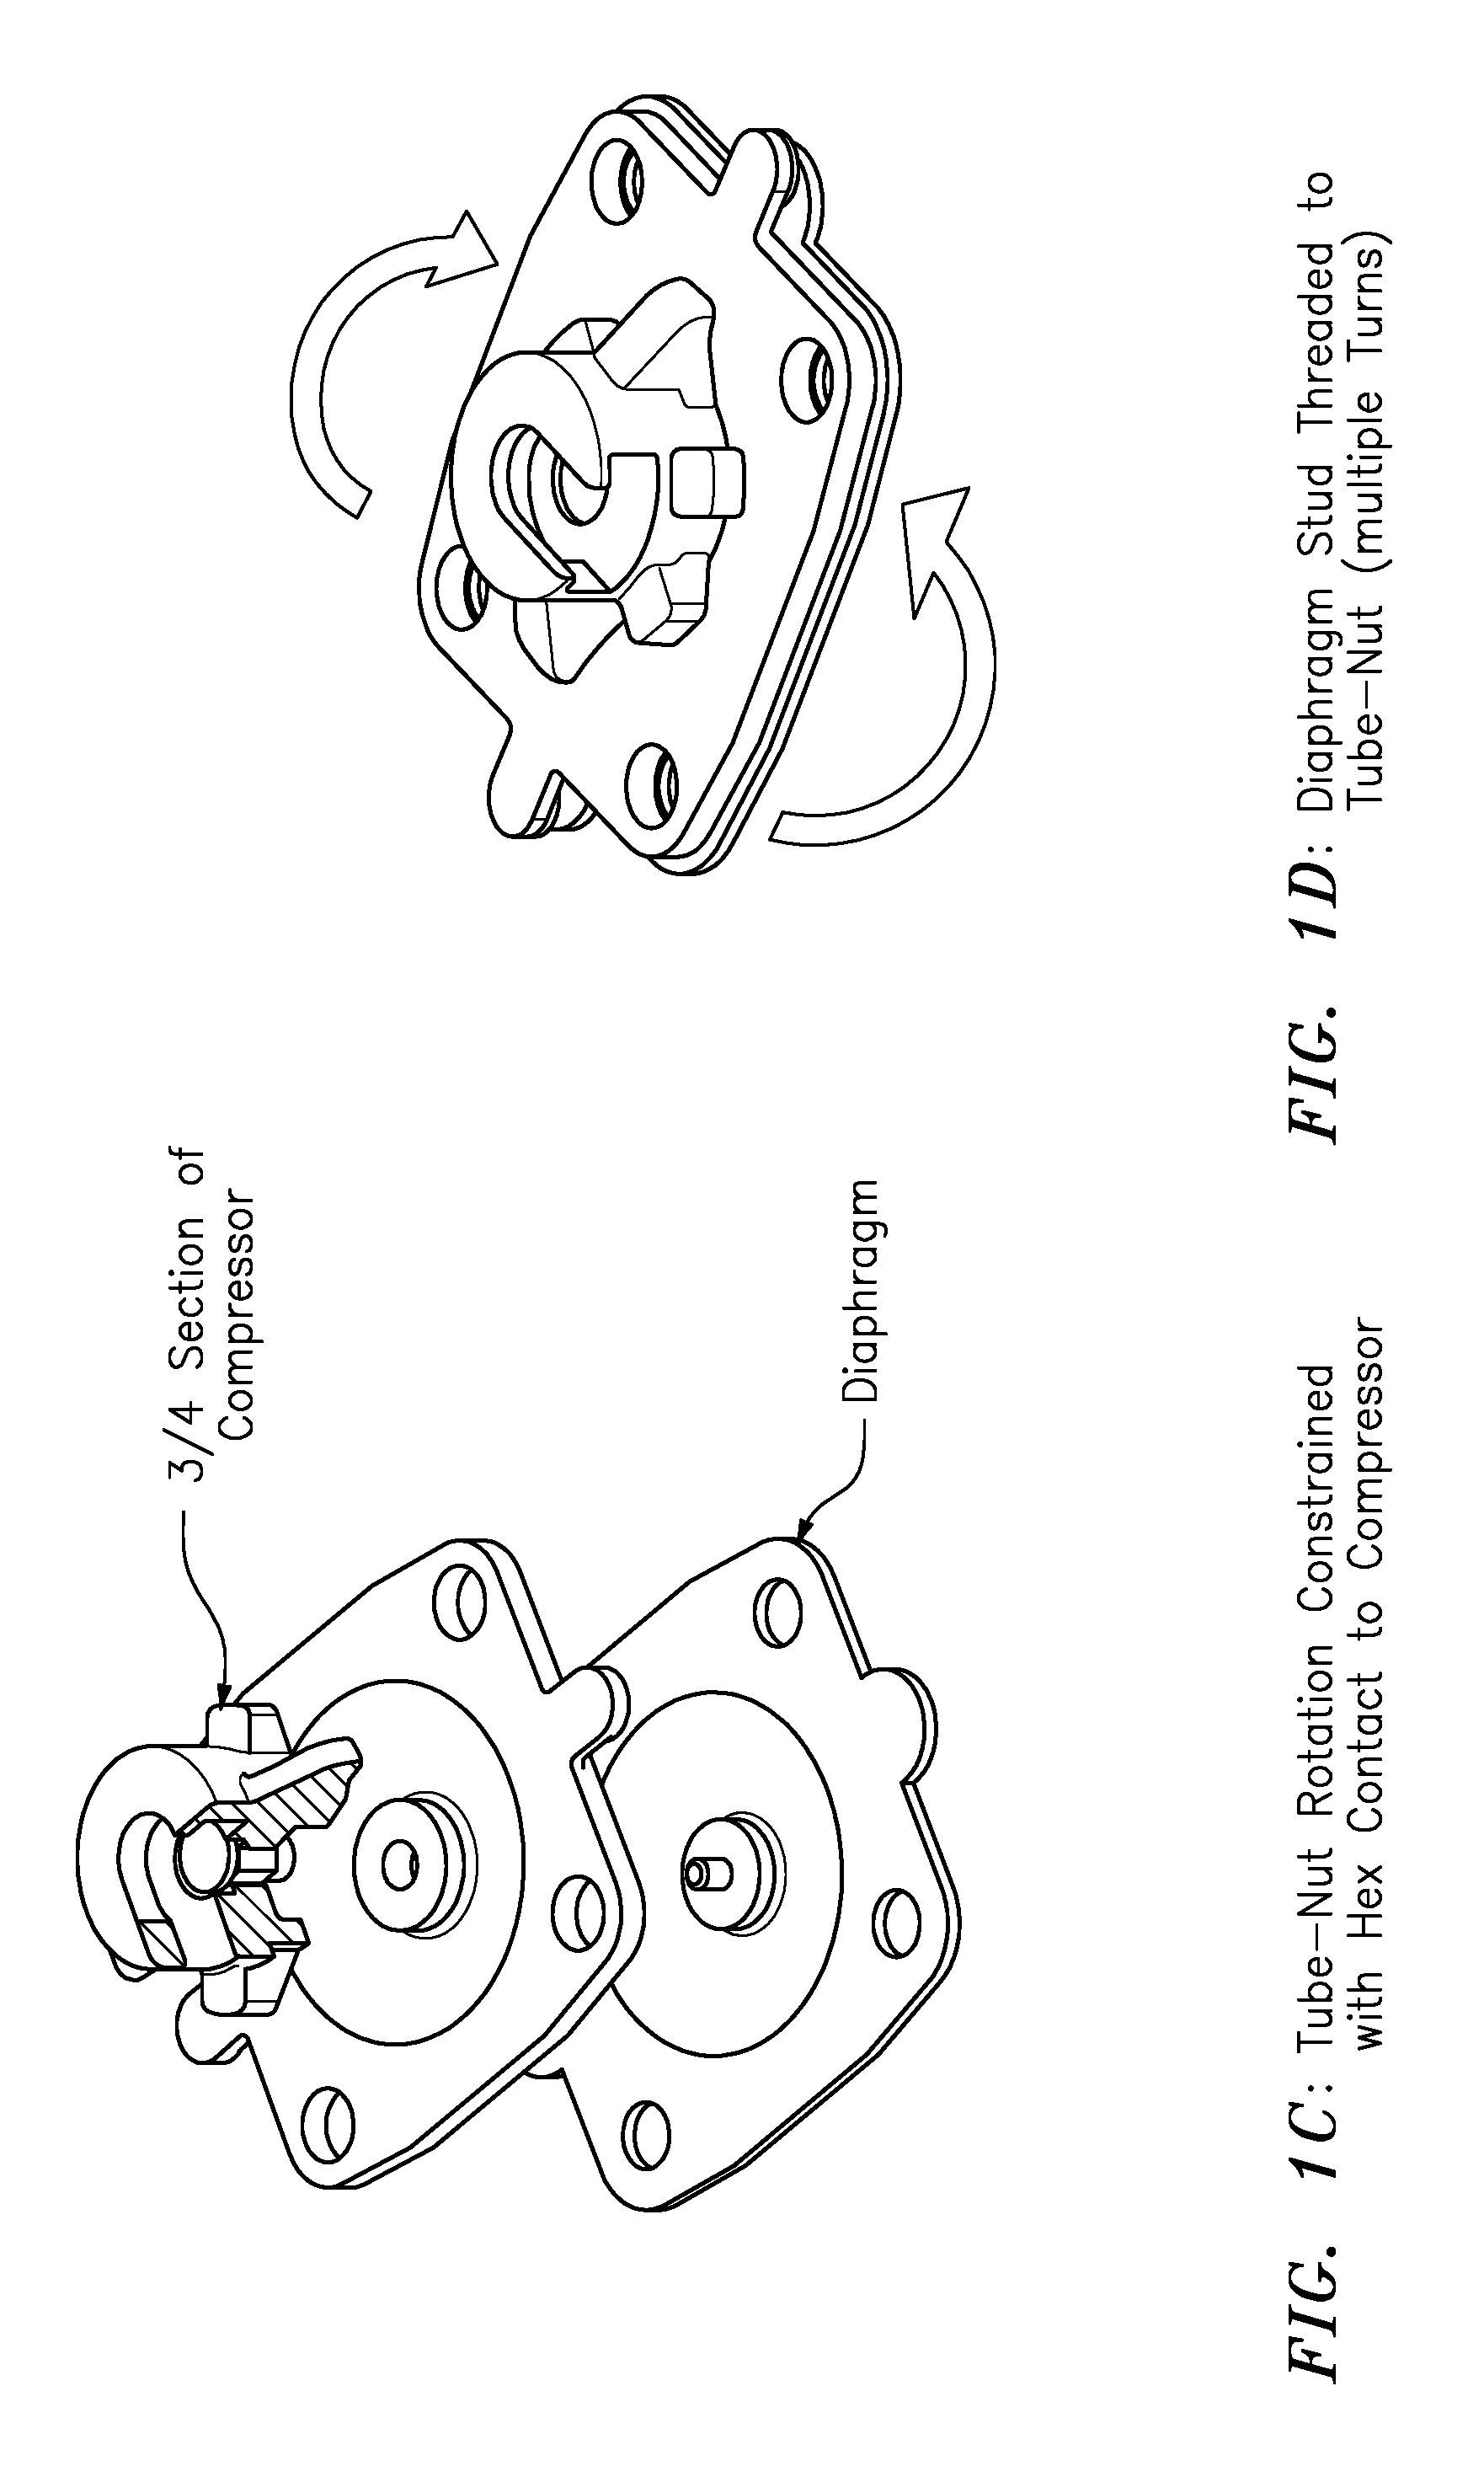 Valve having at least one hourglass studs for coupling to diaphragm and compressor/spindle components